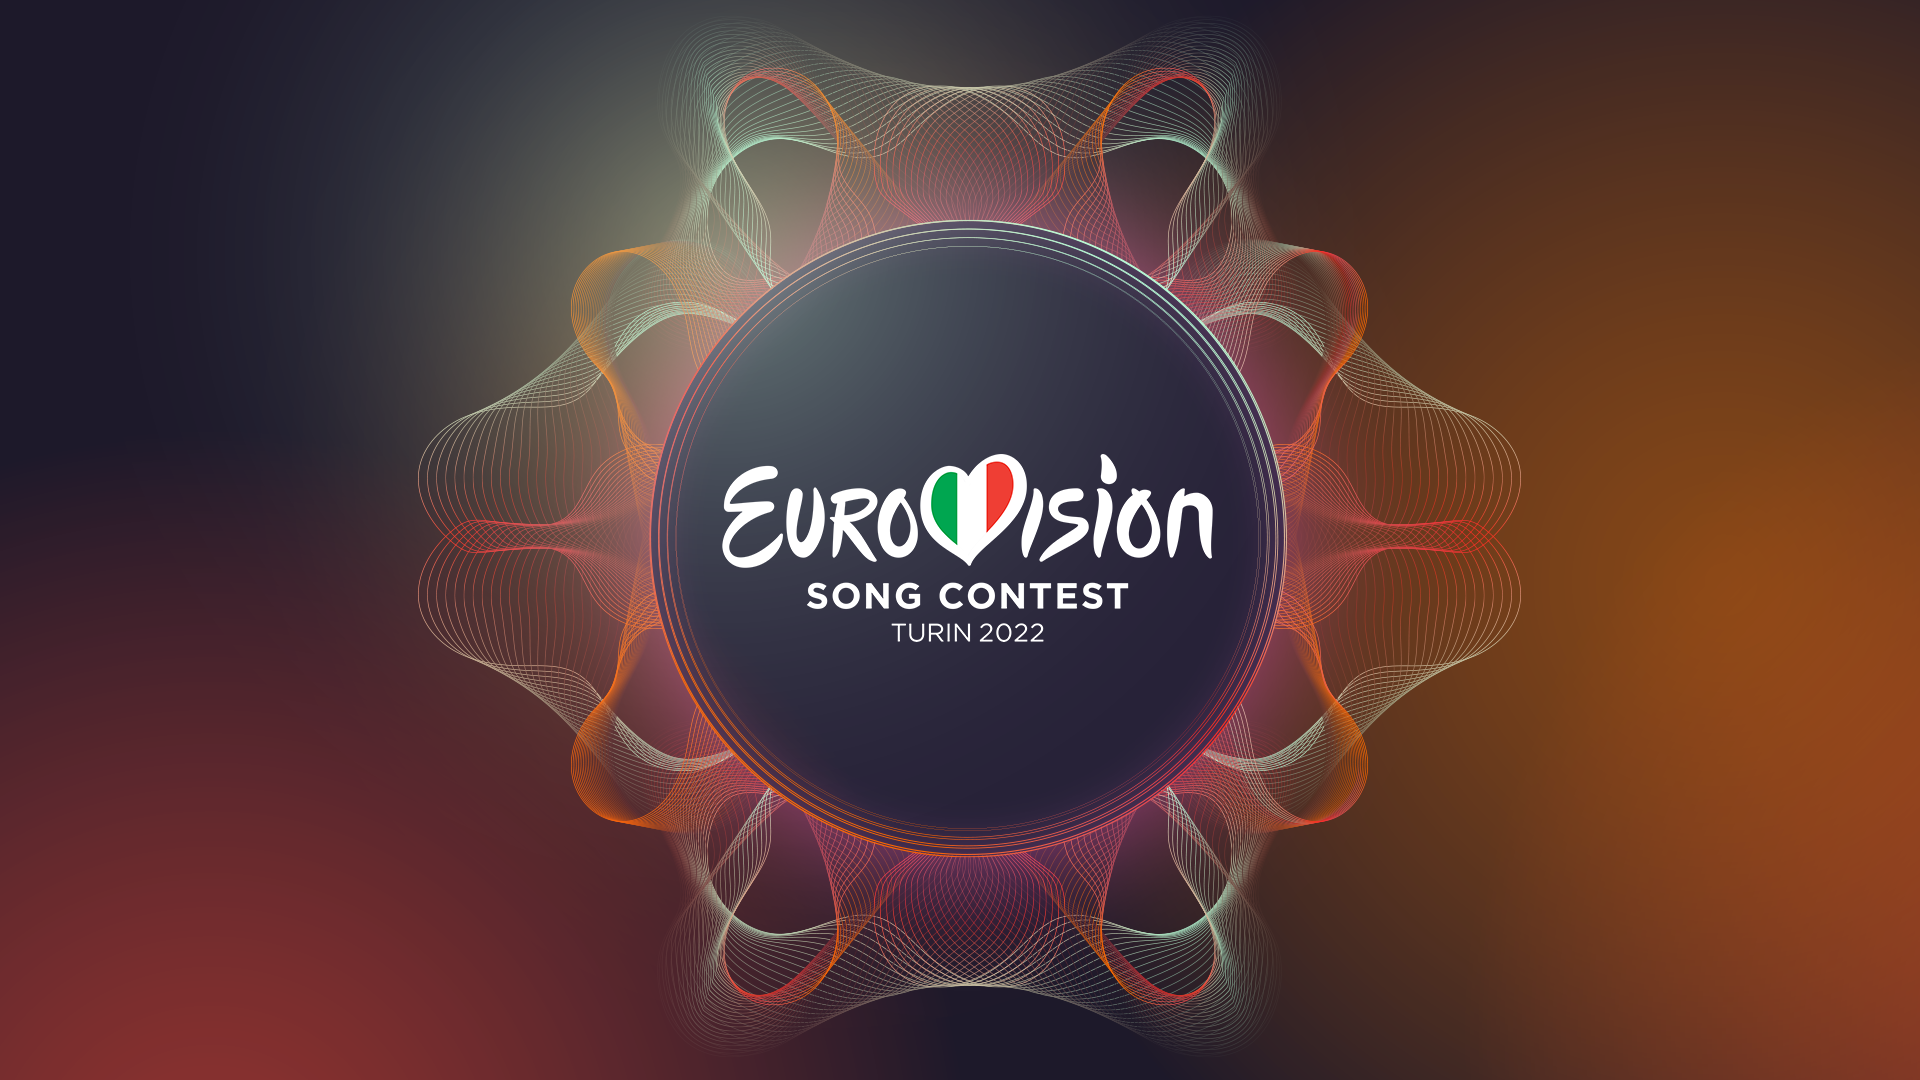 Turin 2022: This year’s Eurovision postcards